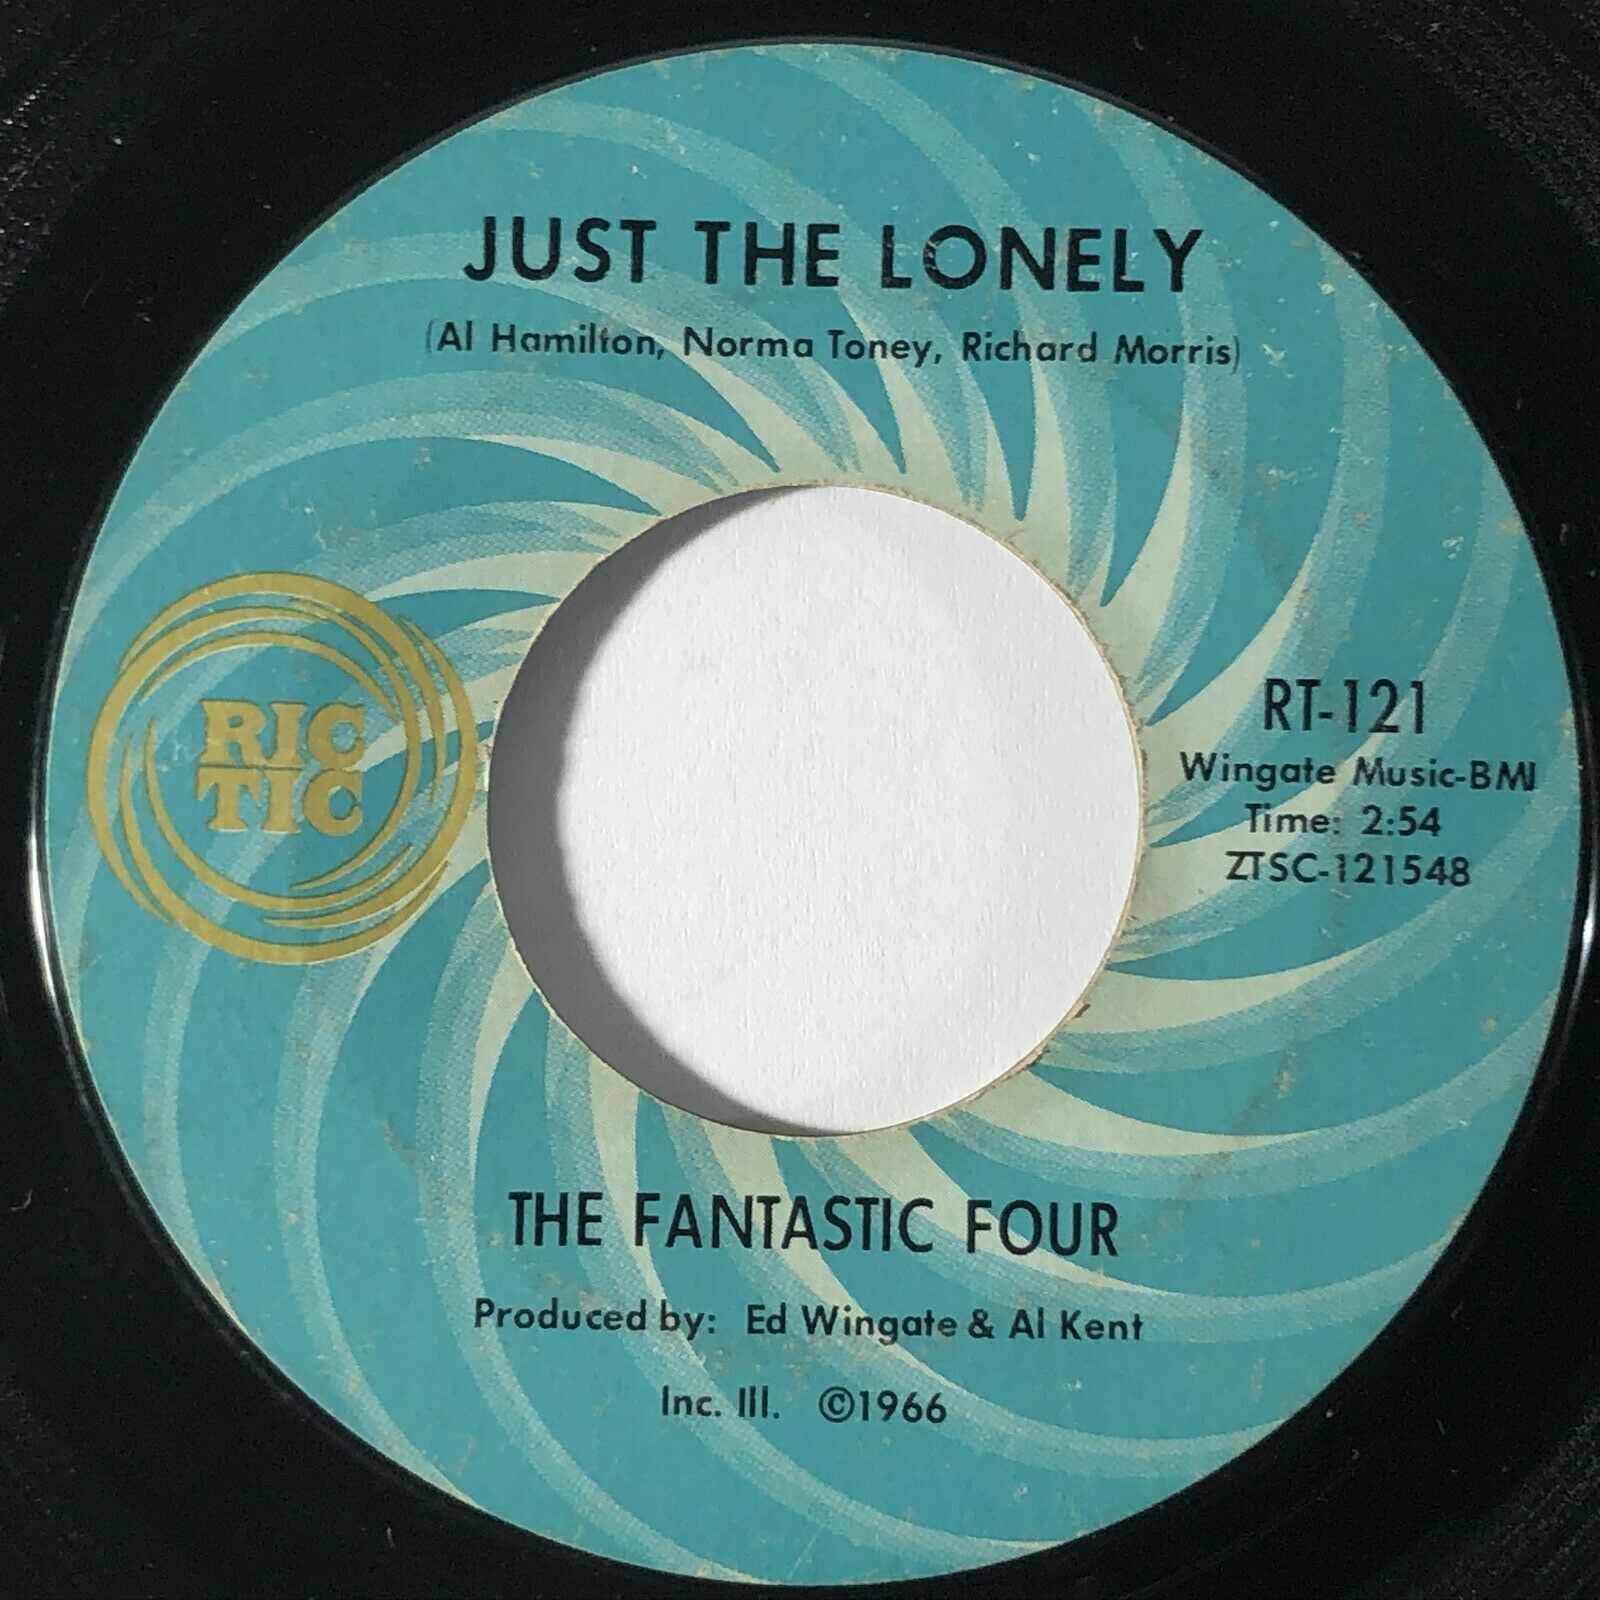 Pic 1 FANTASTIC FOUR Can't Stop Looking for My Baby Ric-Tic Northern Soul 45 HEAR